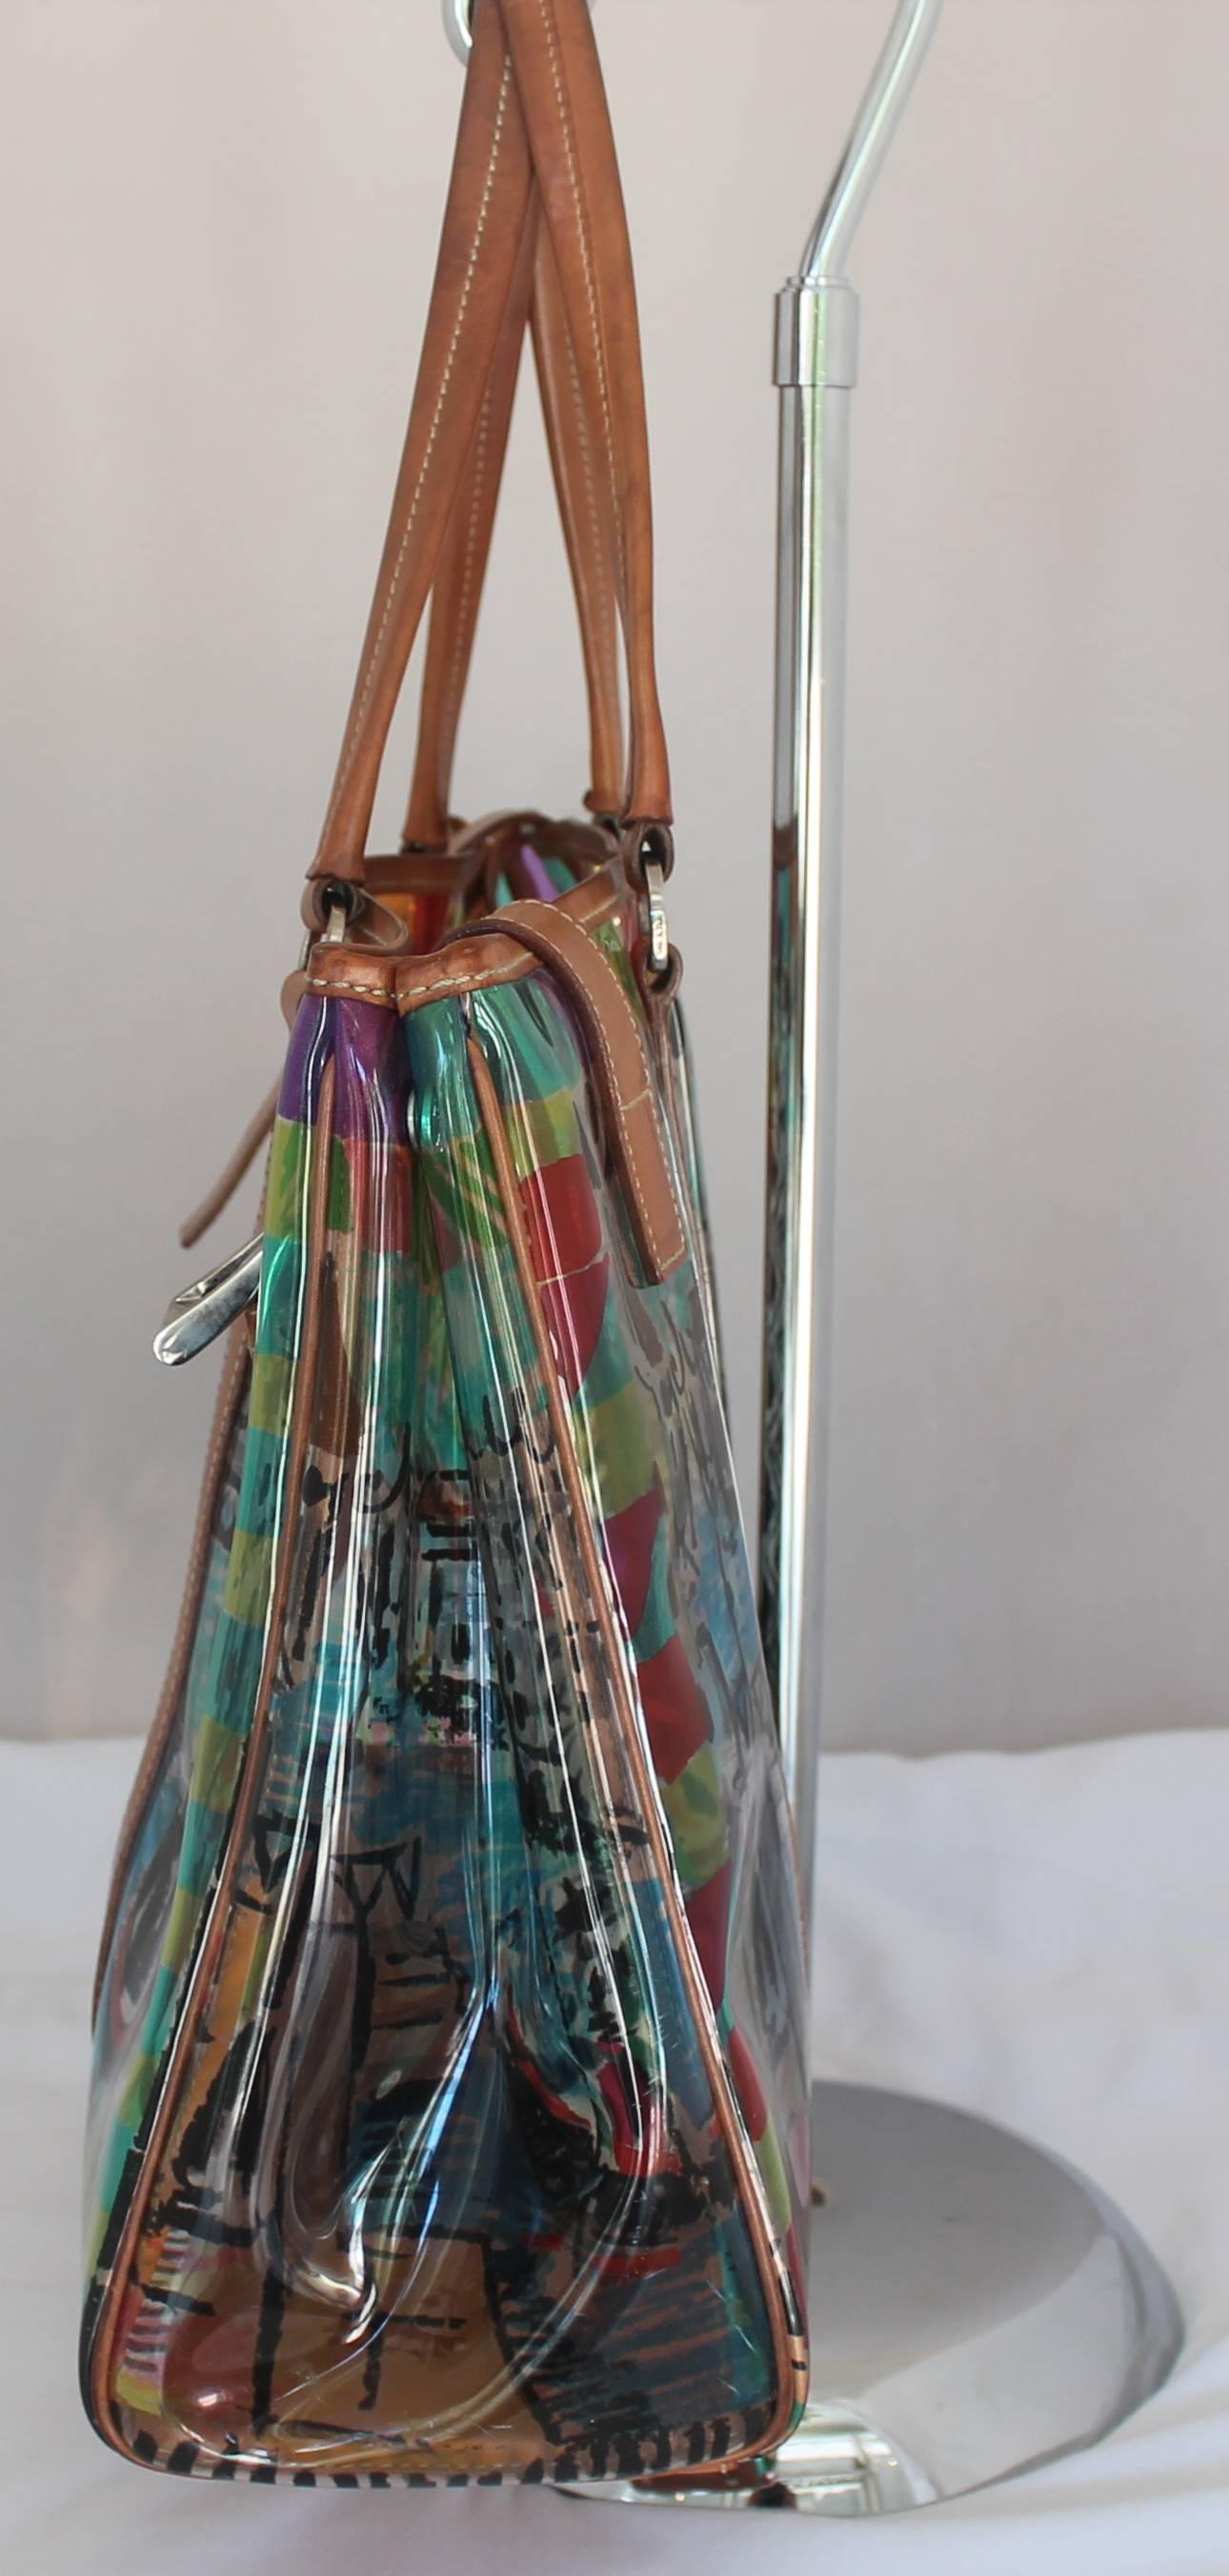 Prada Clear Multi Color Print Plastic Tote w/ leather trim/strap-SHW  HAs matching fabric makeup bag inside. 2 leather straps down front buckle, marks on leather where strap buckled. Makeup bag strap needs to be reattached to the inside of the